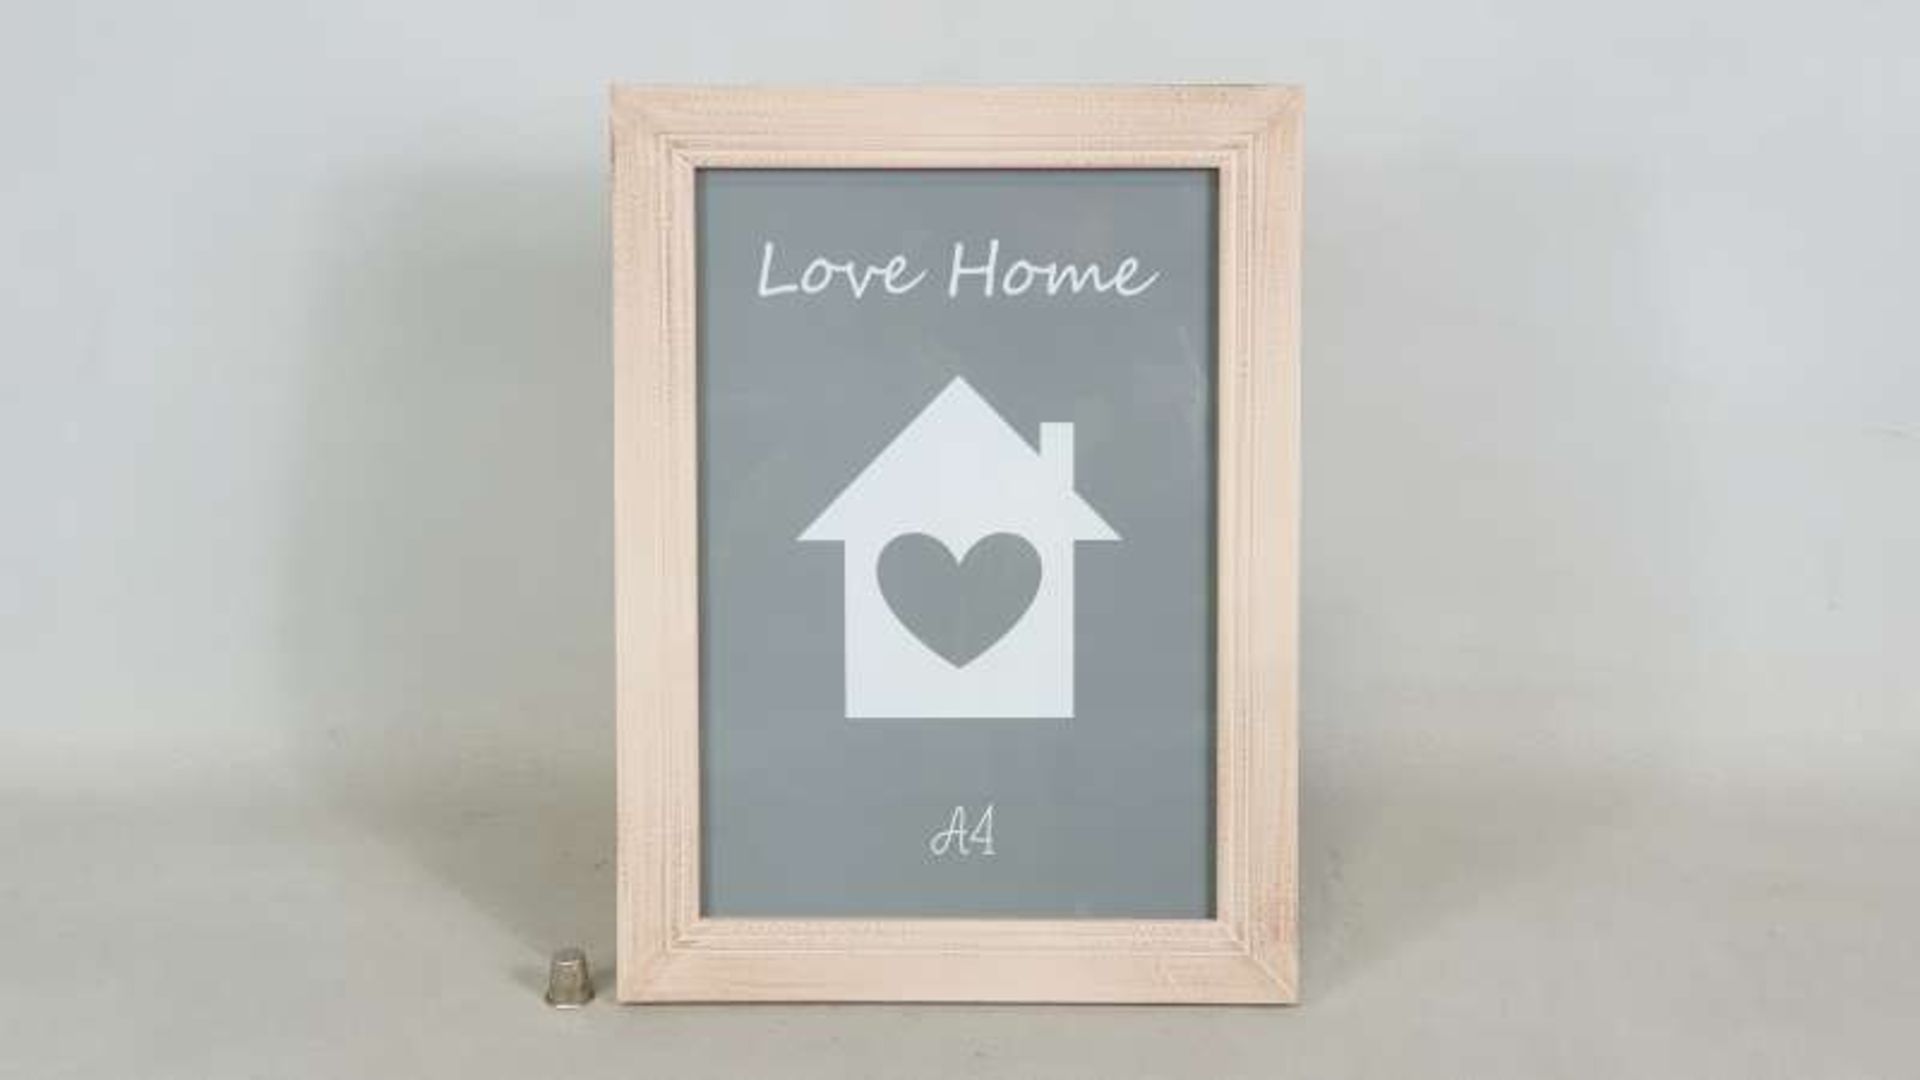 48 X LOVE HOME A4 PICTURE FRAMES IN 4 BOXES